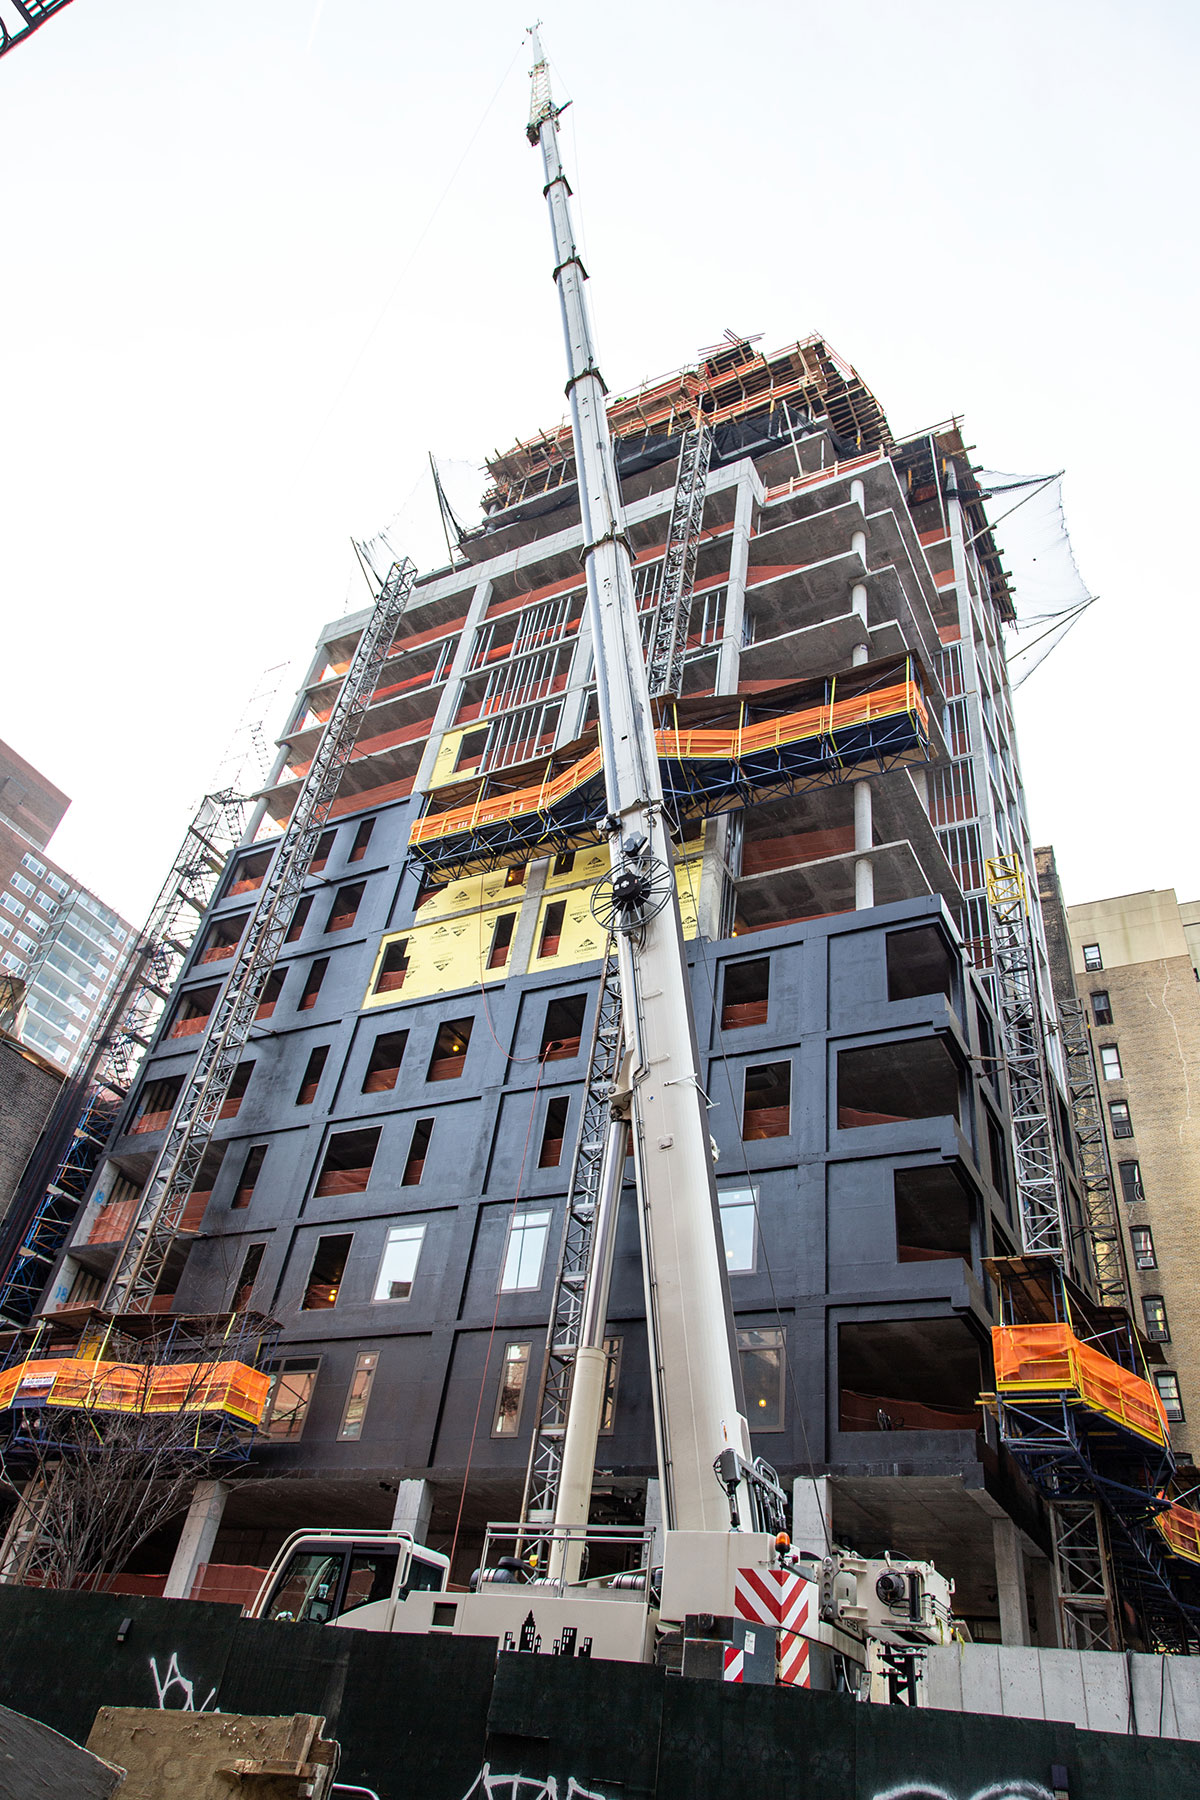 Construction Tops-Off For "Dahlia" at 212 West 95th Street